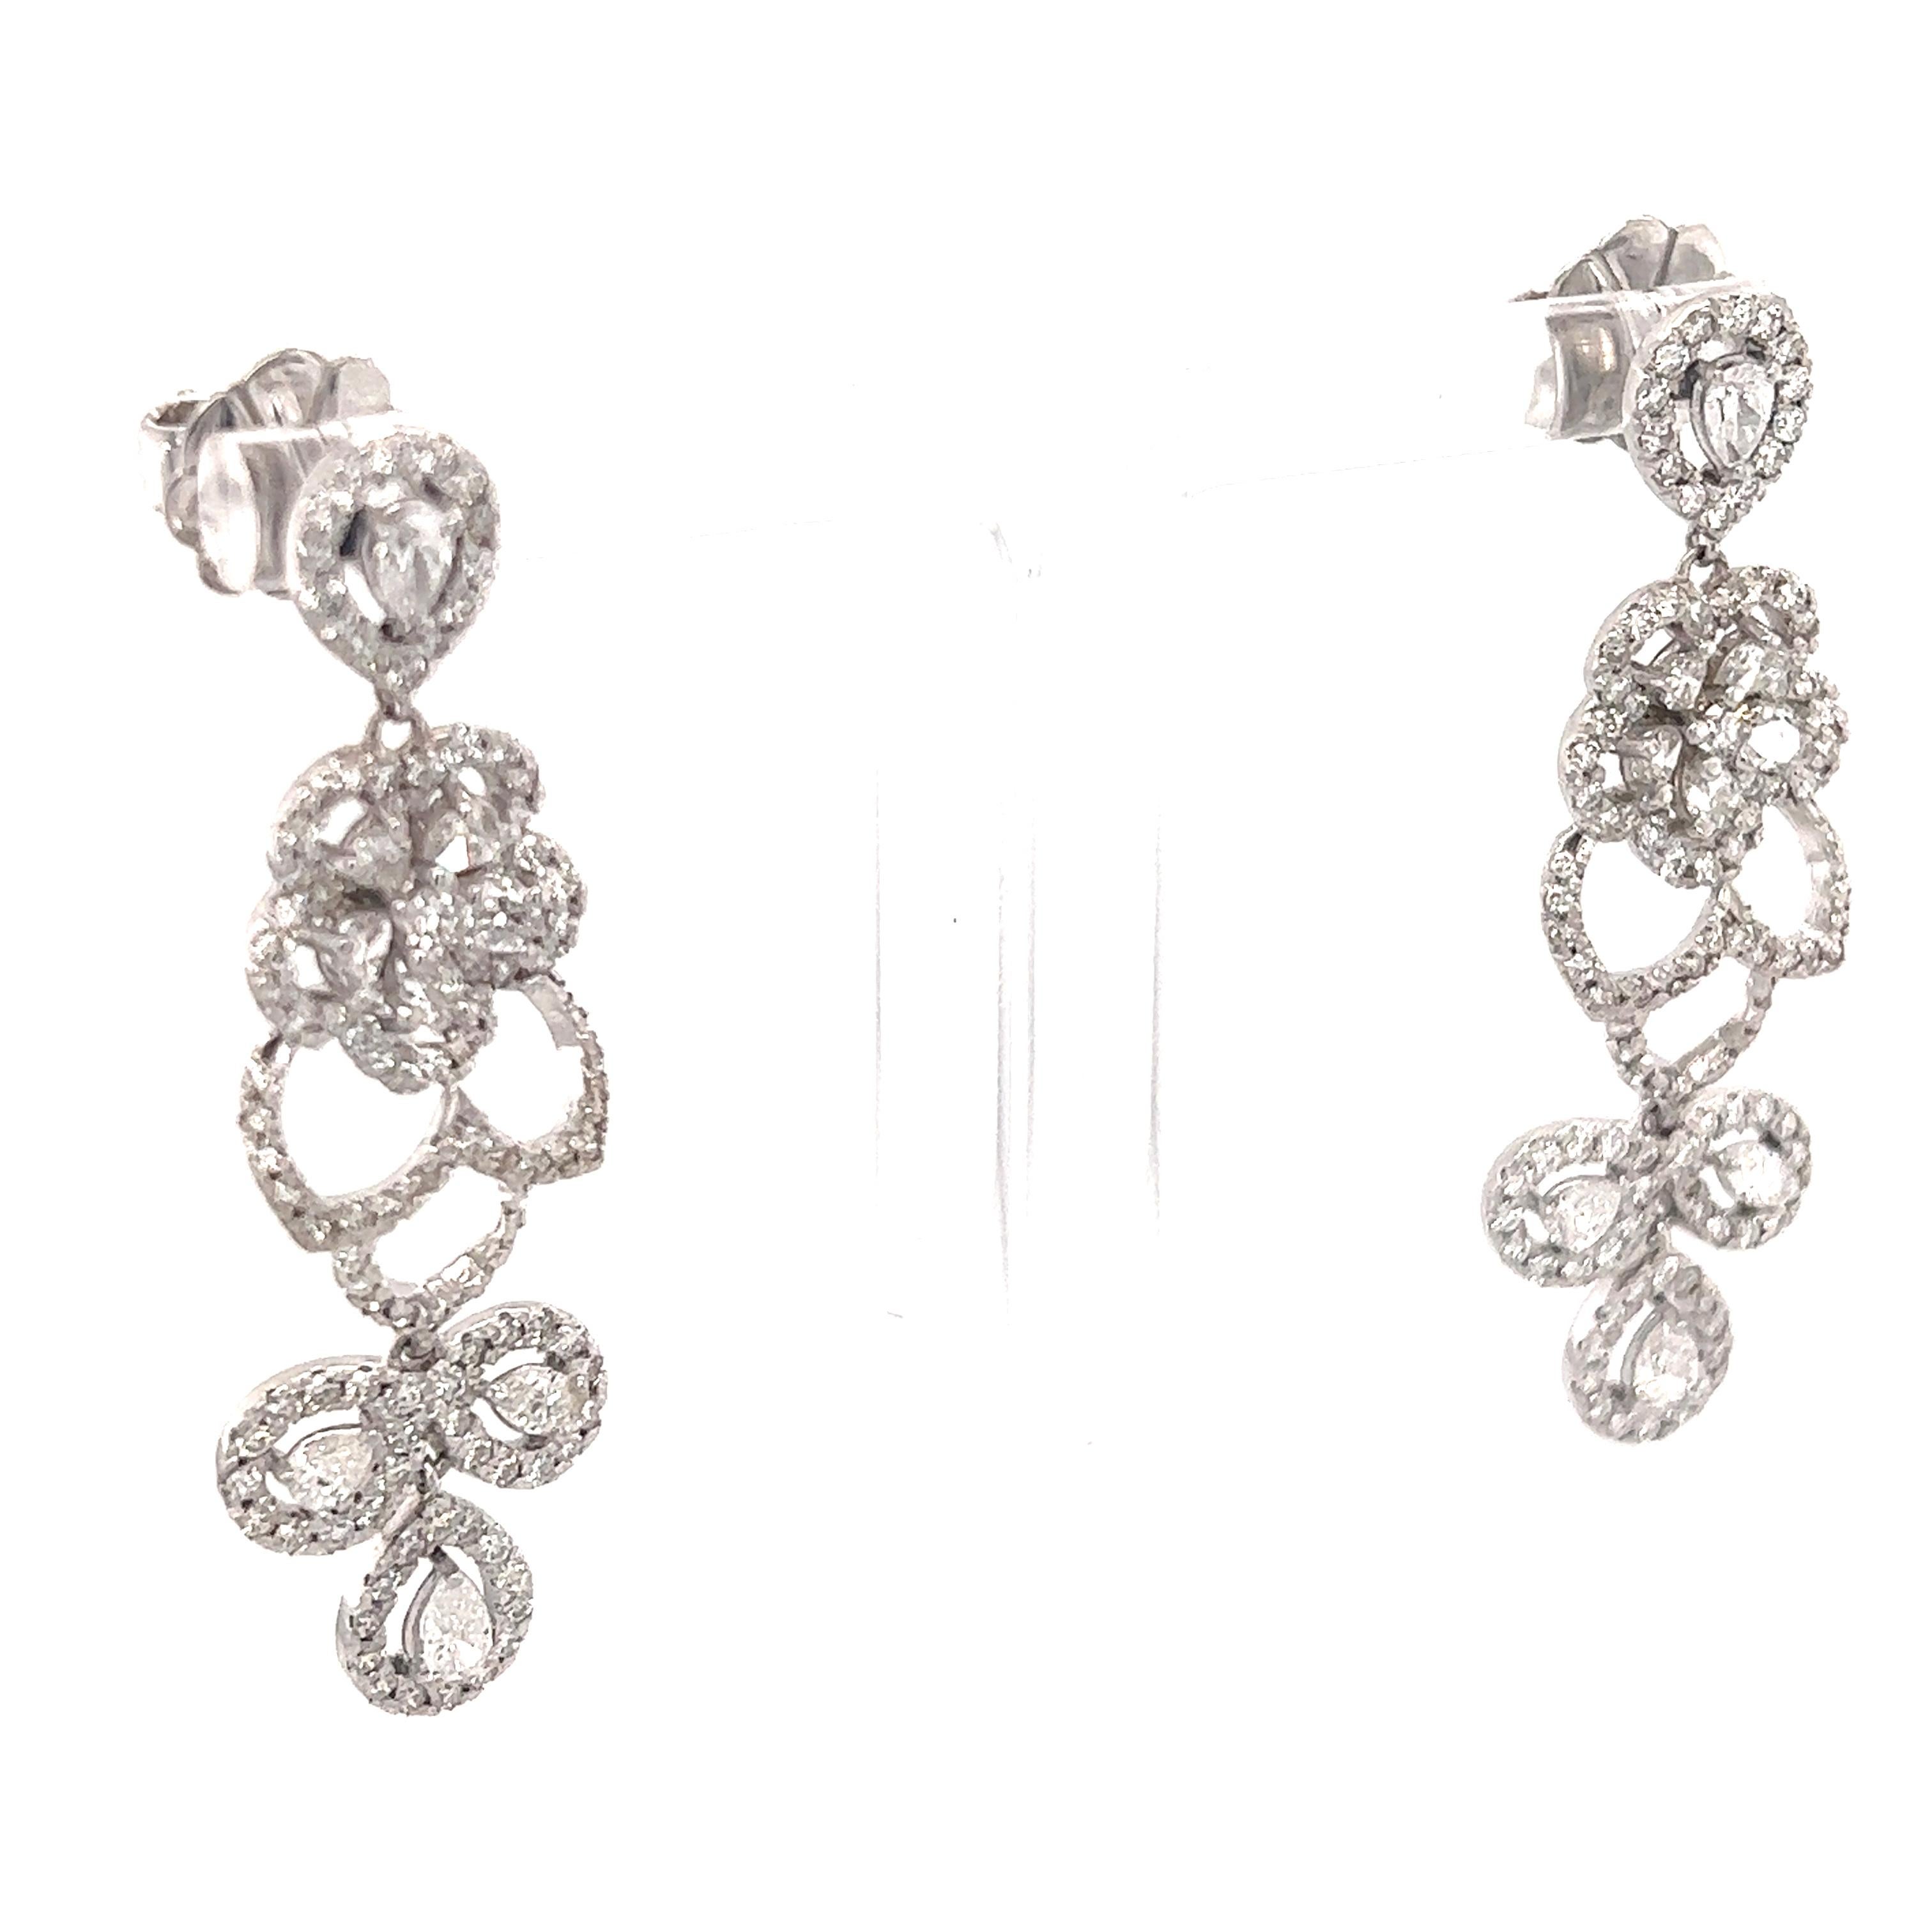 These earrings have Natural Pear Cut White Diamonds that weigh 1.44 carats and Natural Round Cut White Diamonds that weigh 2.05 carats. The total carat weight of the earrings are 3.49 carats. 

The clarity and color of the earrings are VS-F. 

They